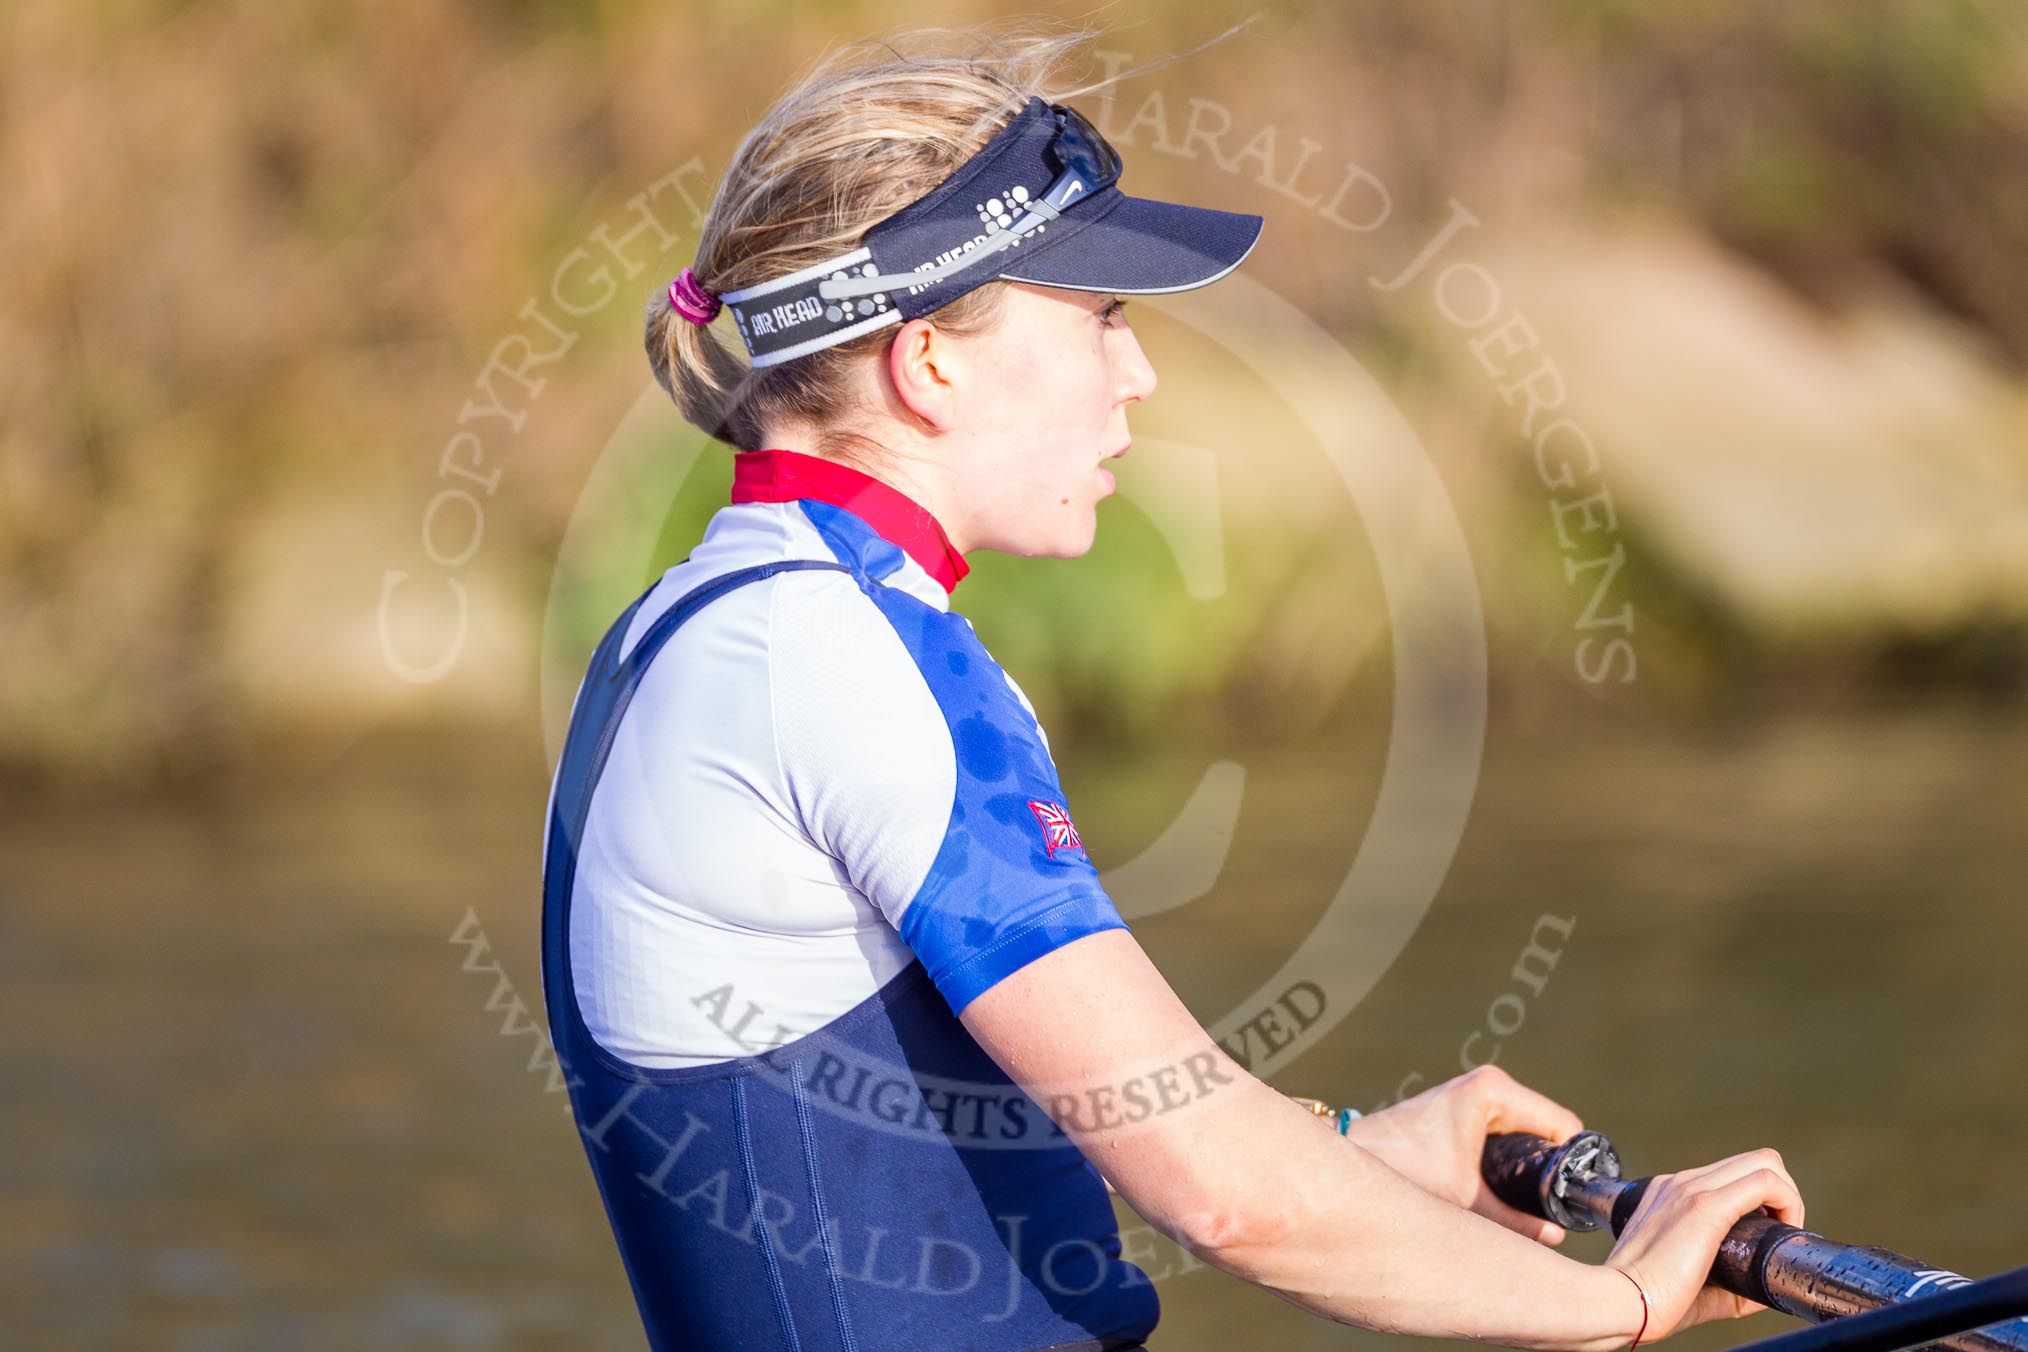 The Boat Race season 2015: OUWBC training Wallingford.

Wallingford,

United Kingdom,
on 04 March 2015 at 16:01, image #152